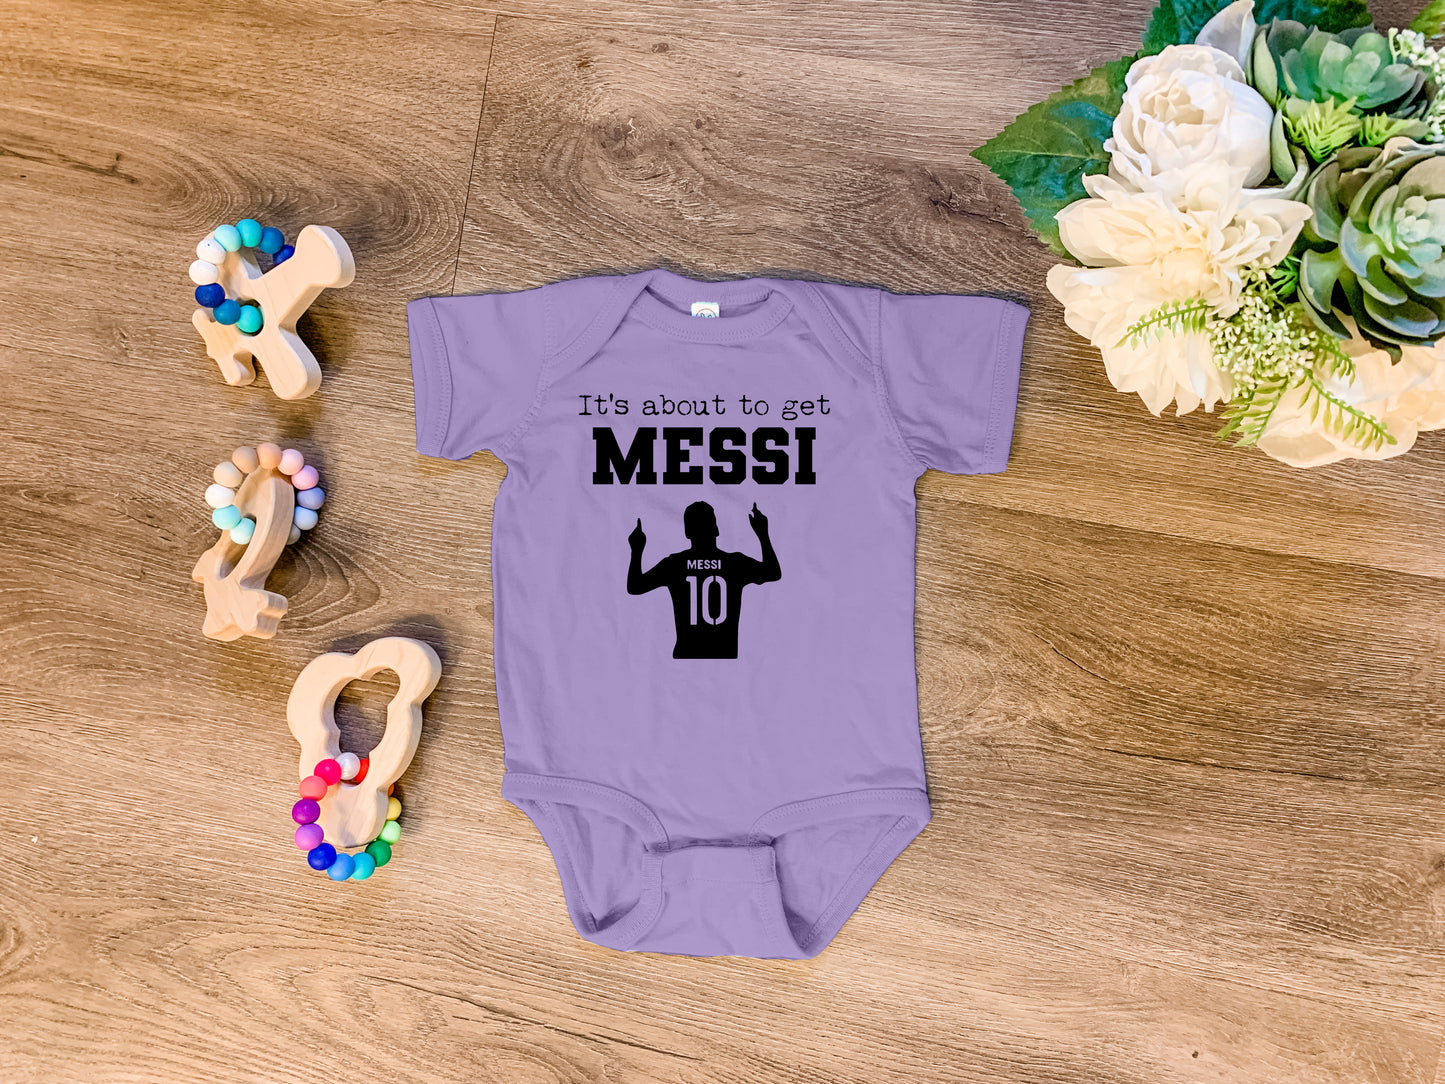 It's About To Get Messi (Soccer) - Onesie - Heather Gray, Chill, or Lavender